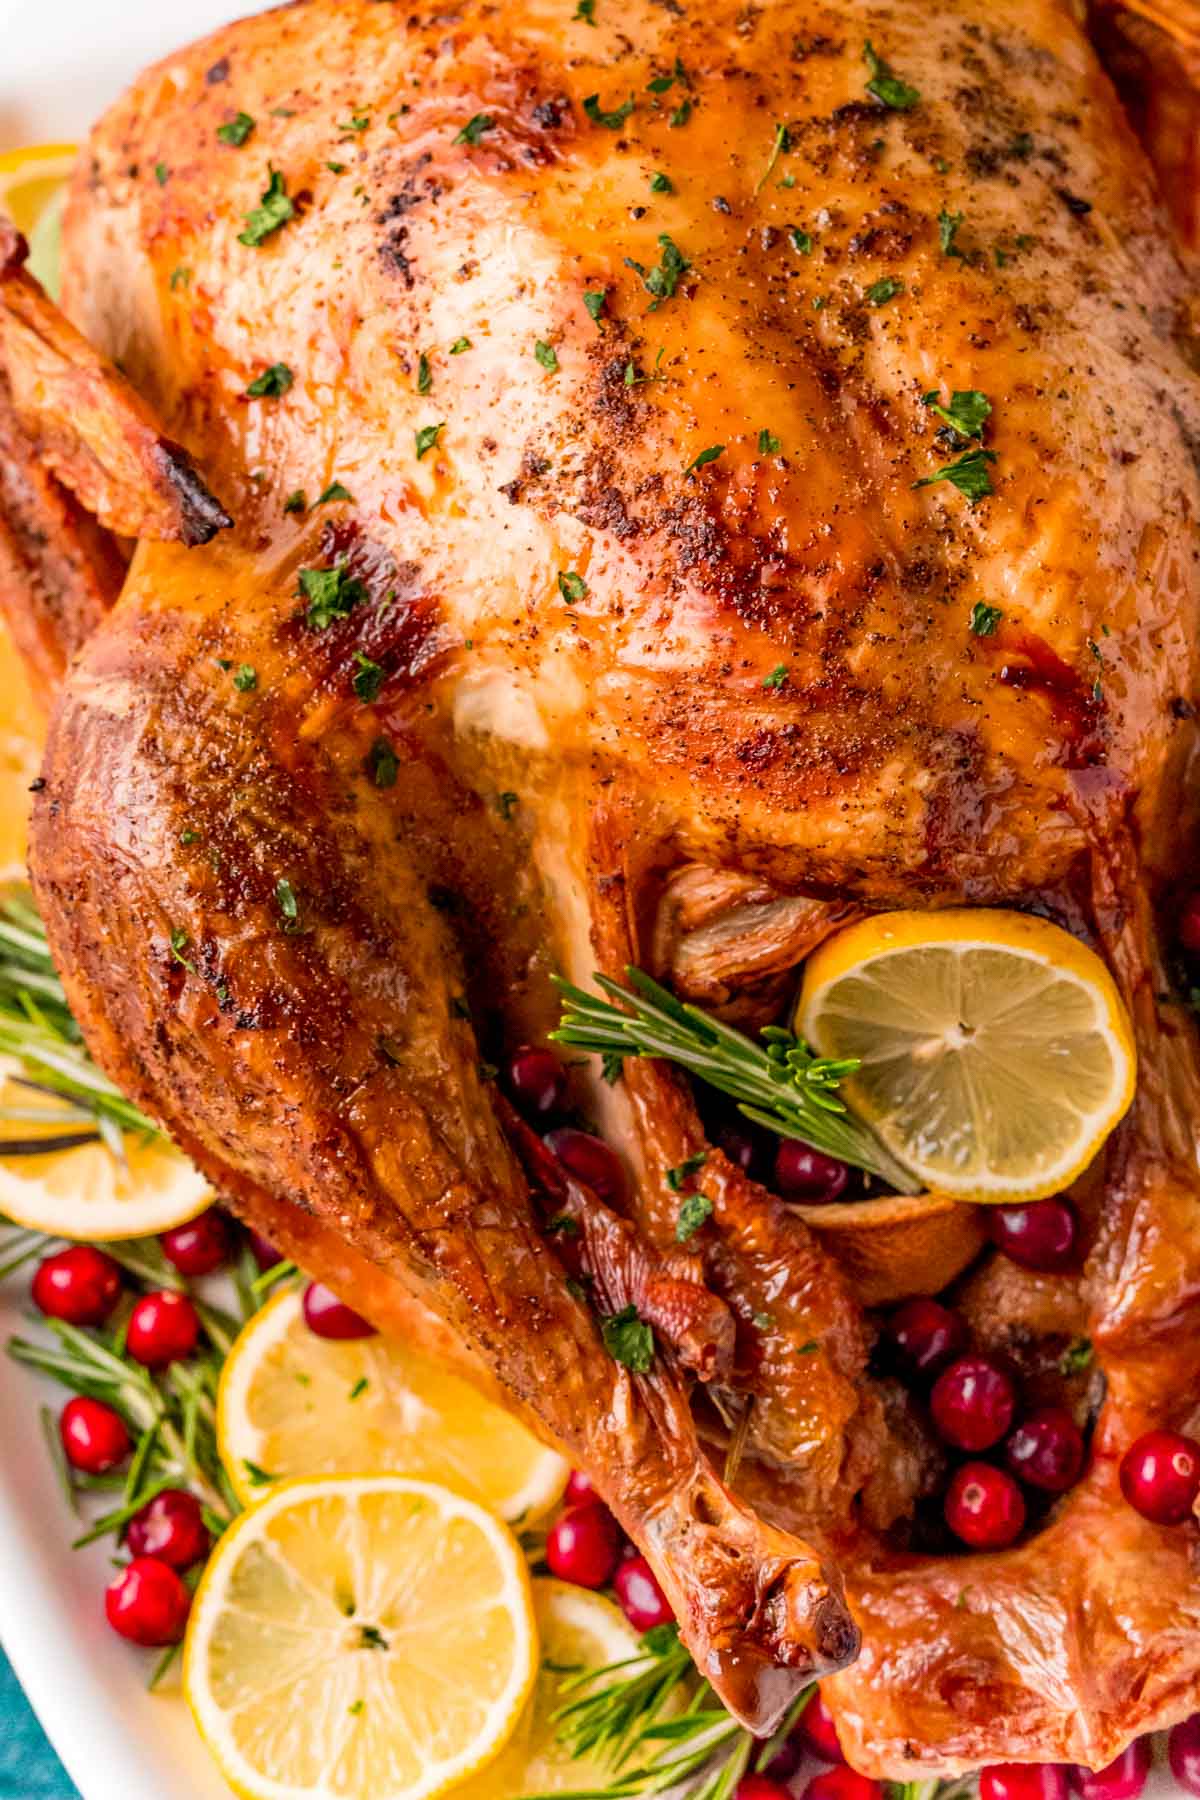 Turkey FUNdamentals: Top Questions for Cooking a Turkey